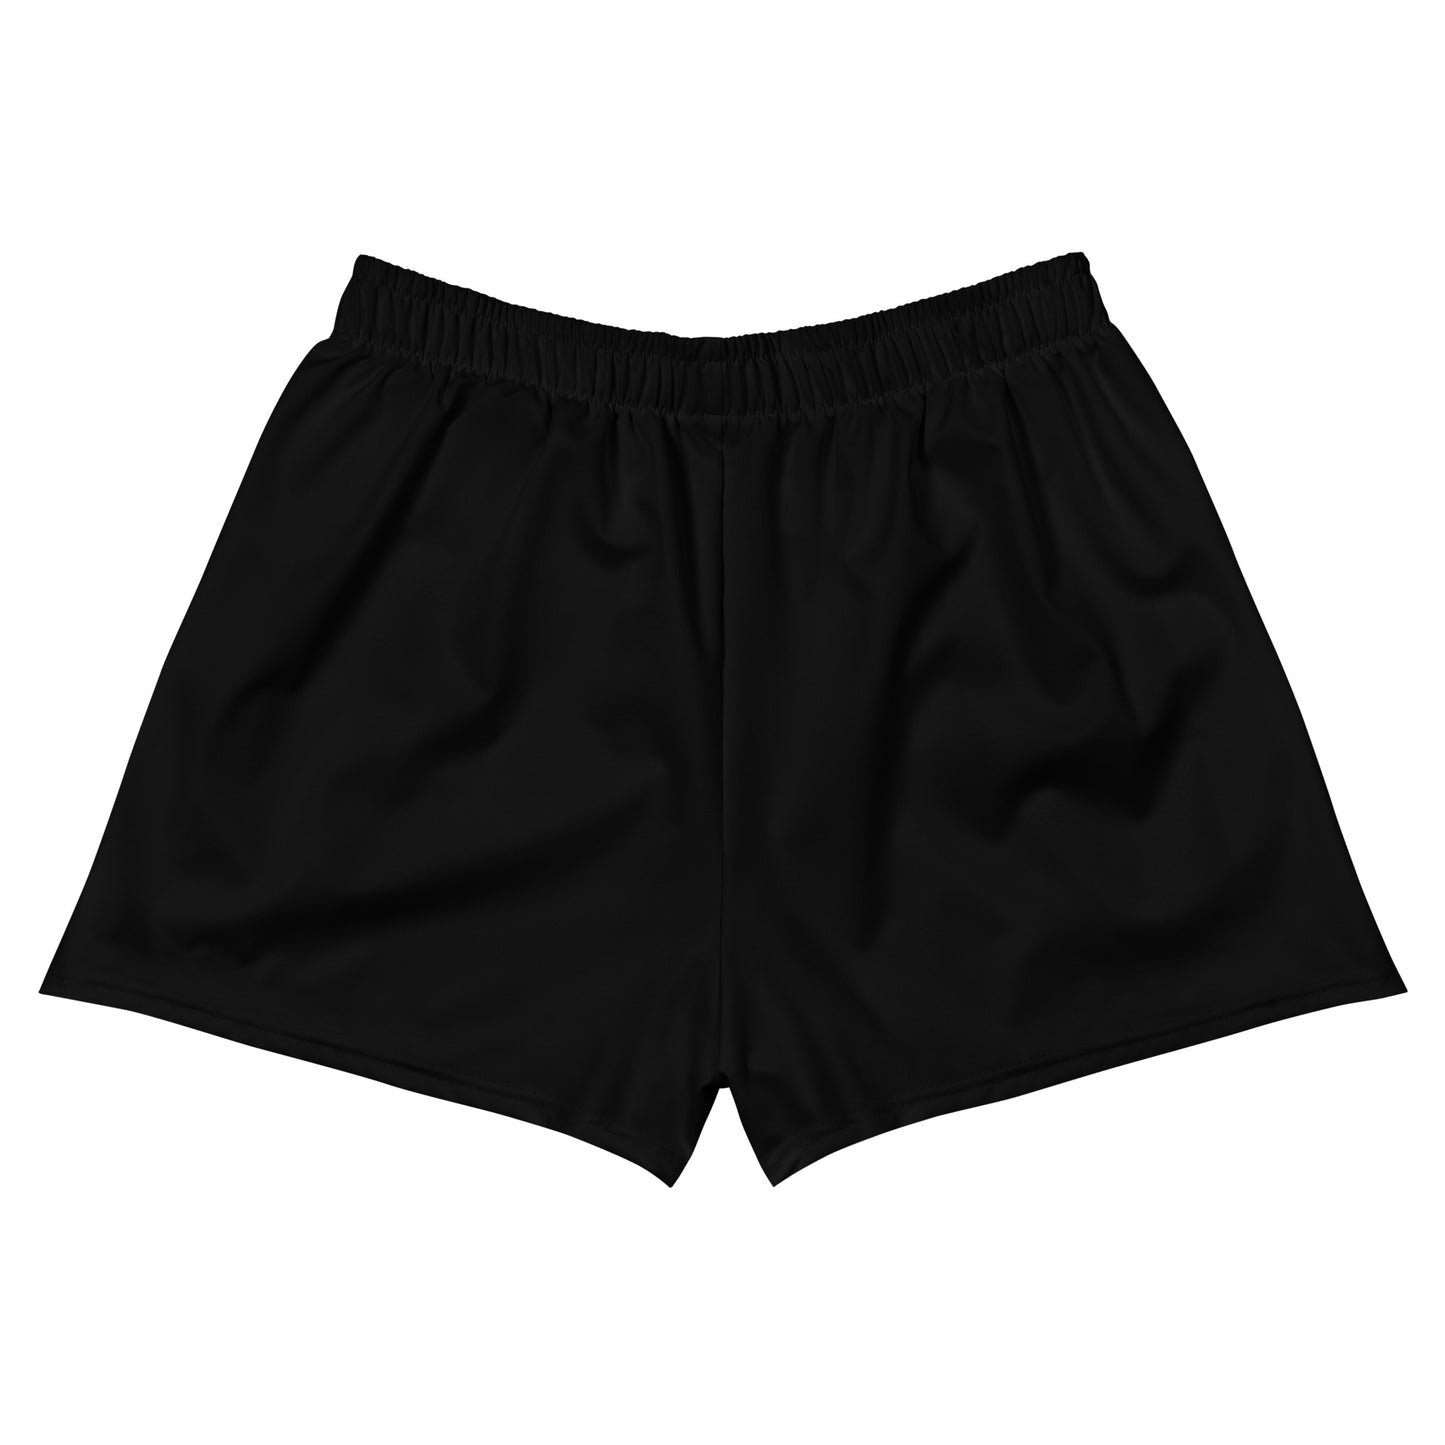 The Classic - Women’s Recycled Athletic Shorts